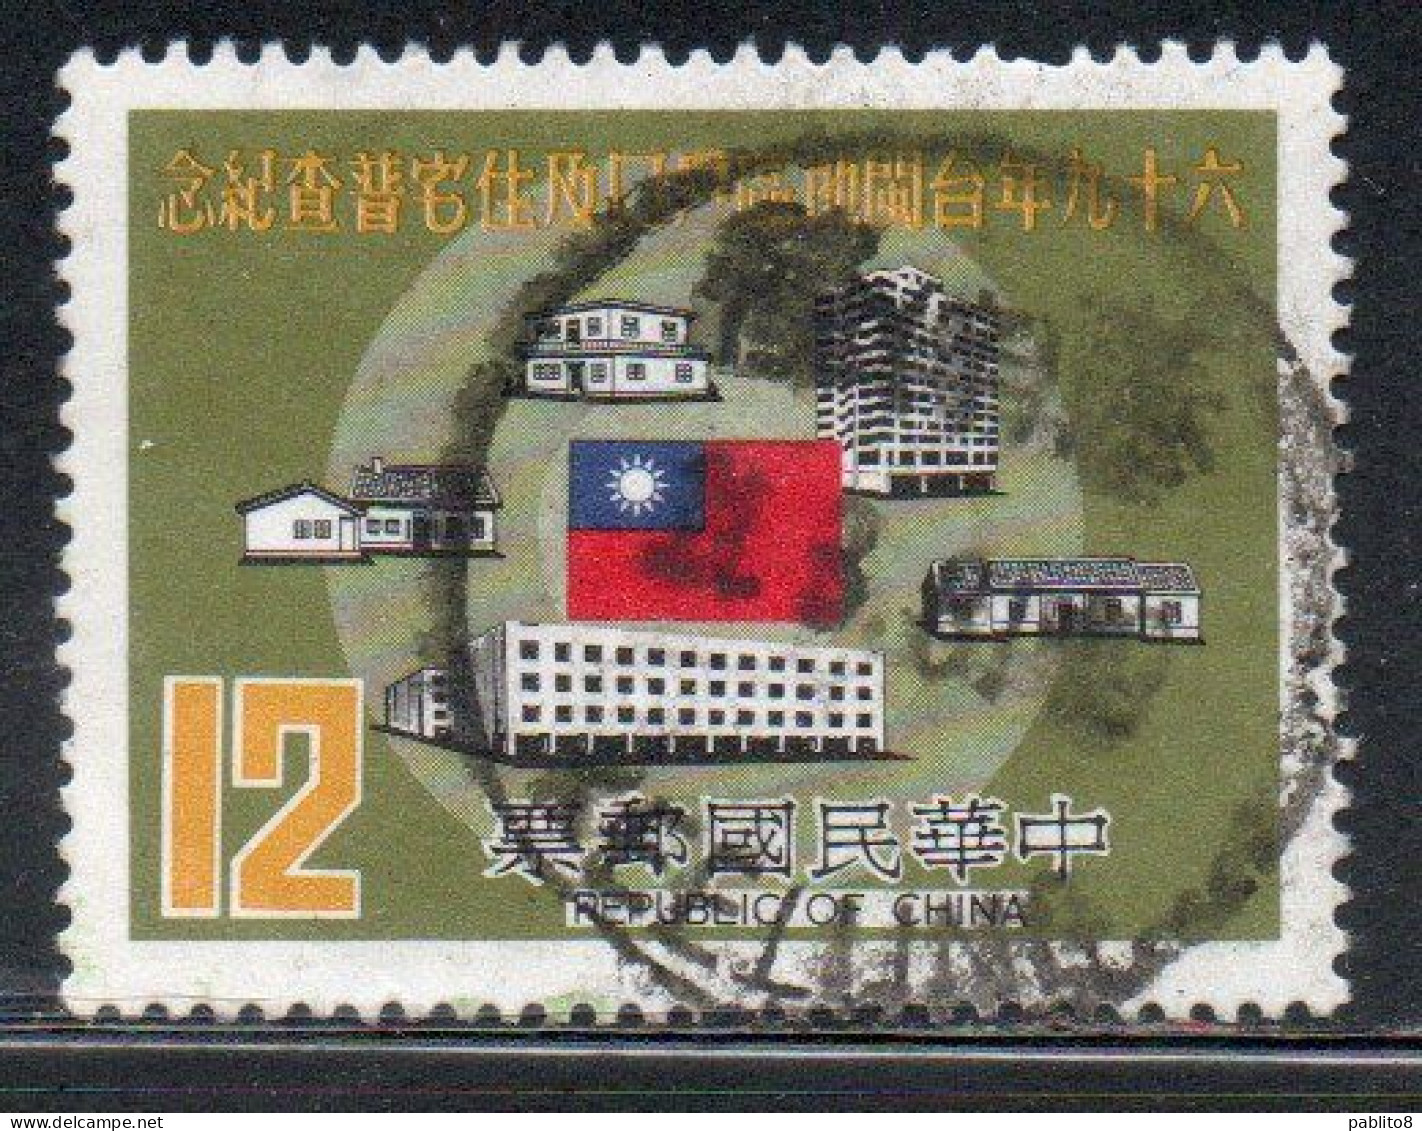 CHINA REPUBLIC CINA TAIWAN FORMOSA 1980 POPULATION AND HOUSING CENSUS 12$ USED USATO OBLITERE' - Used Stamps